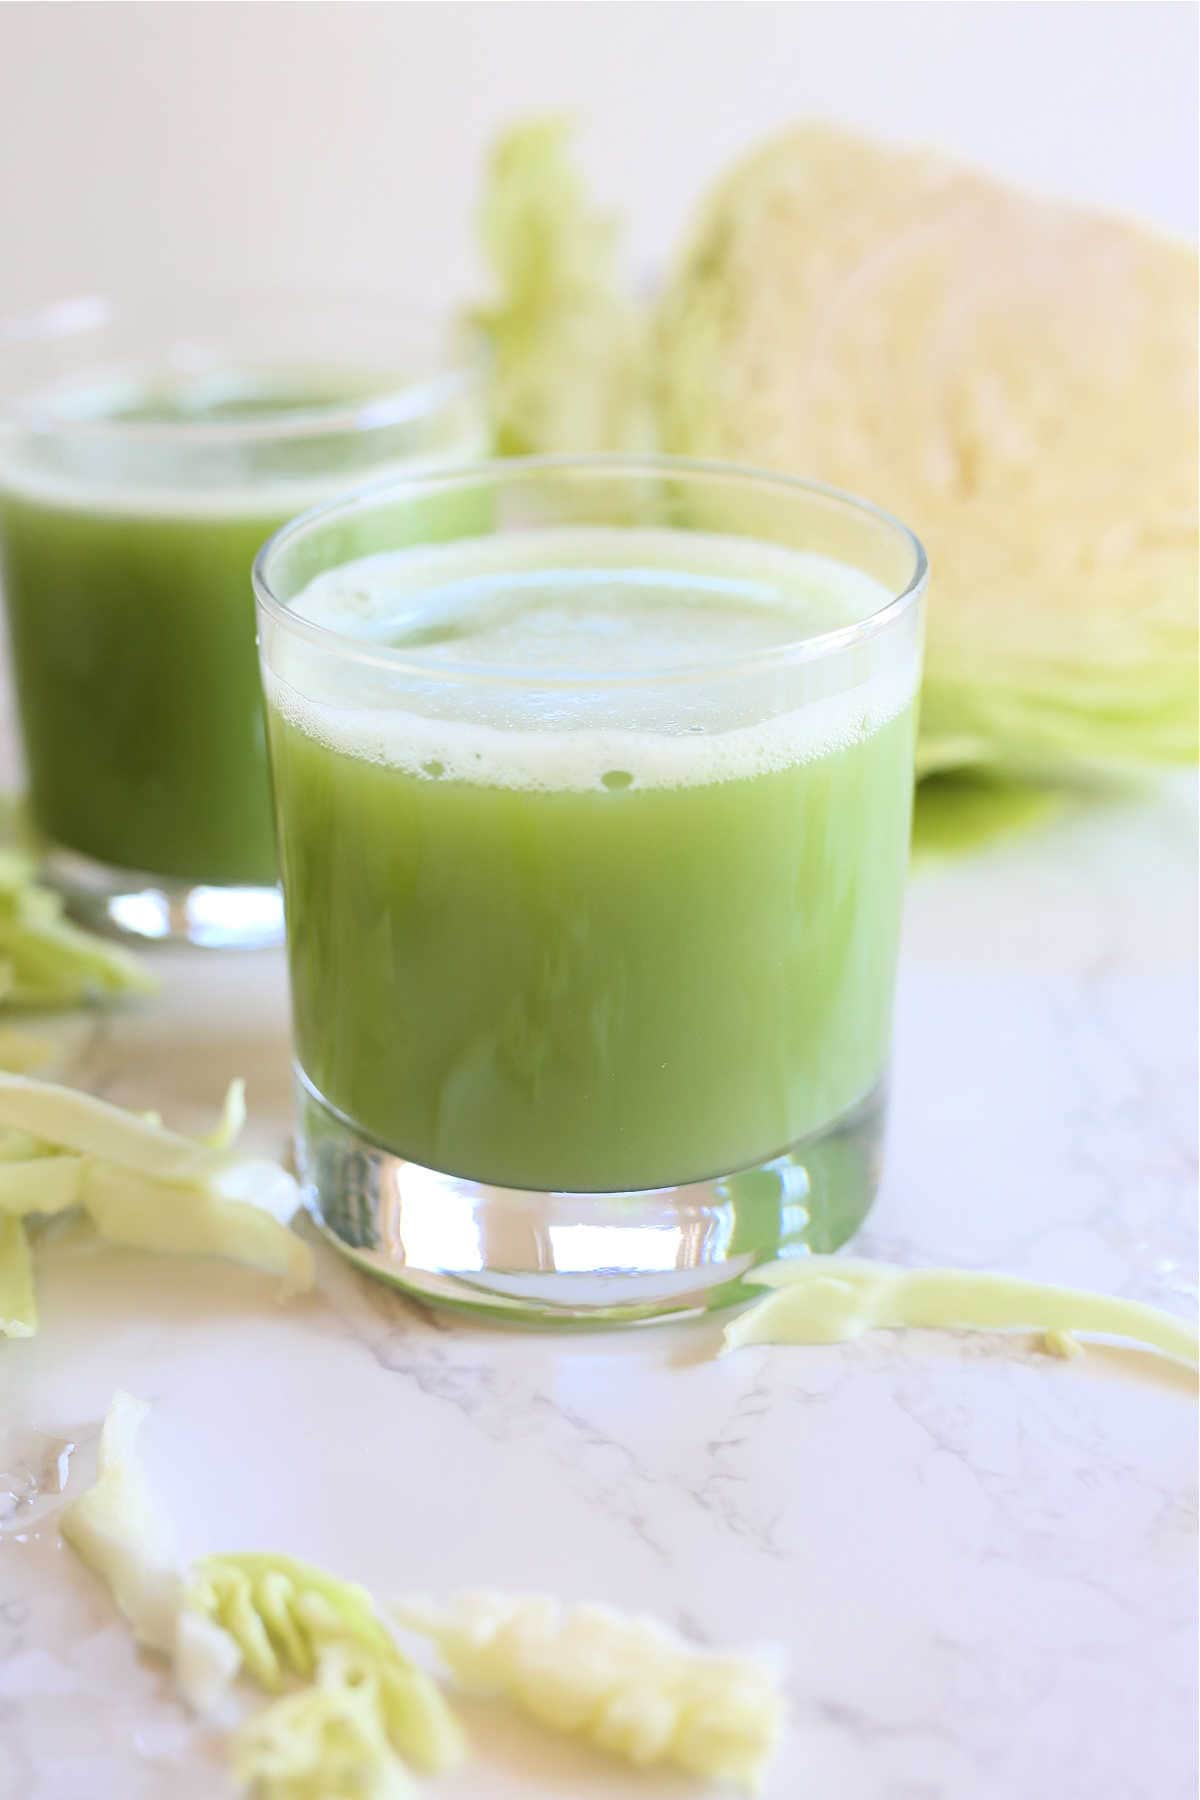 Cabbage juice in a glass.